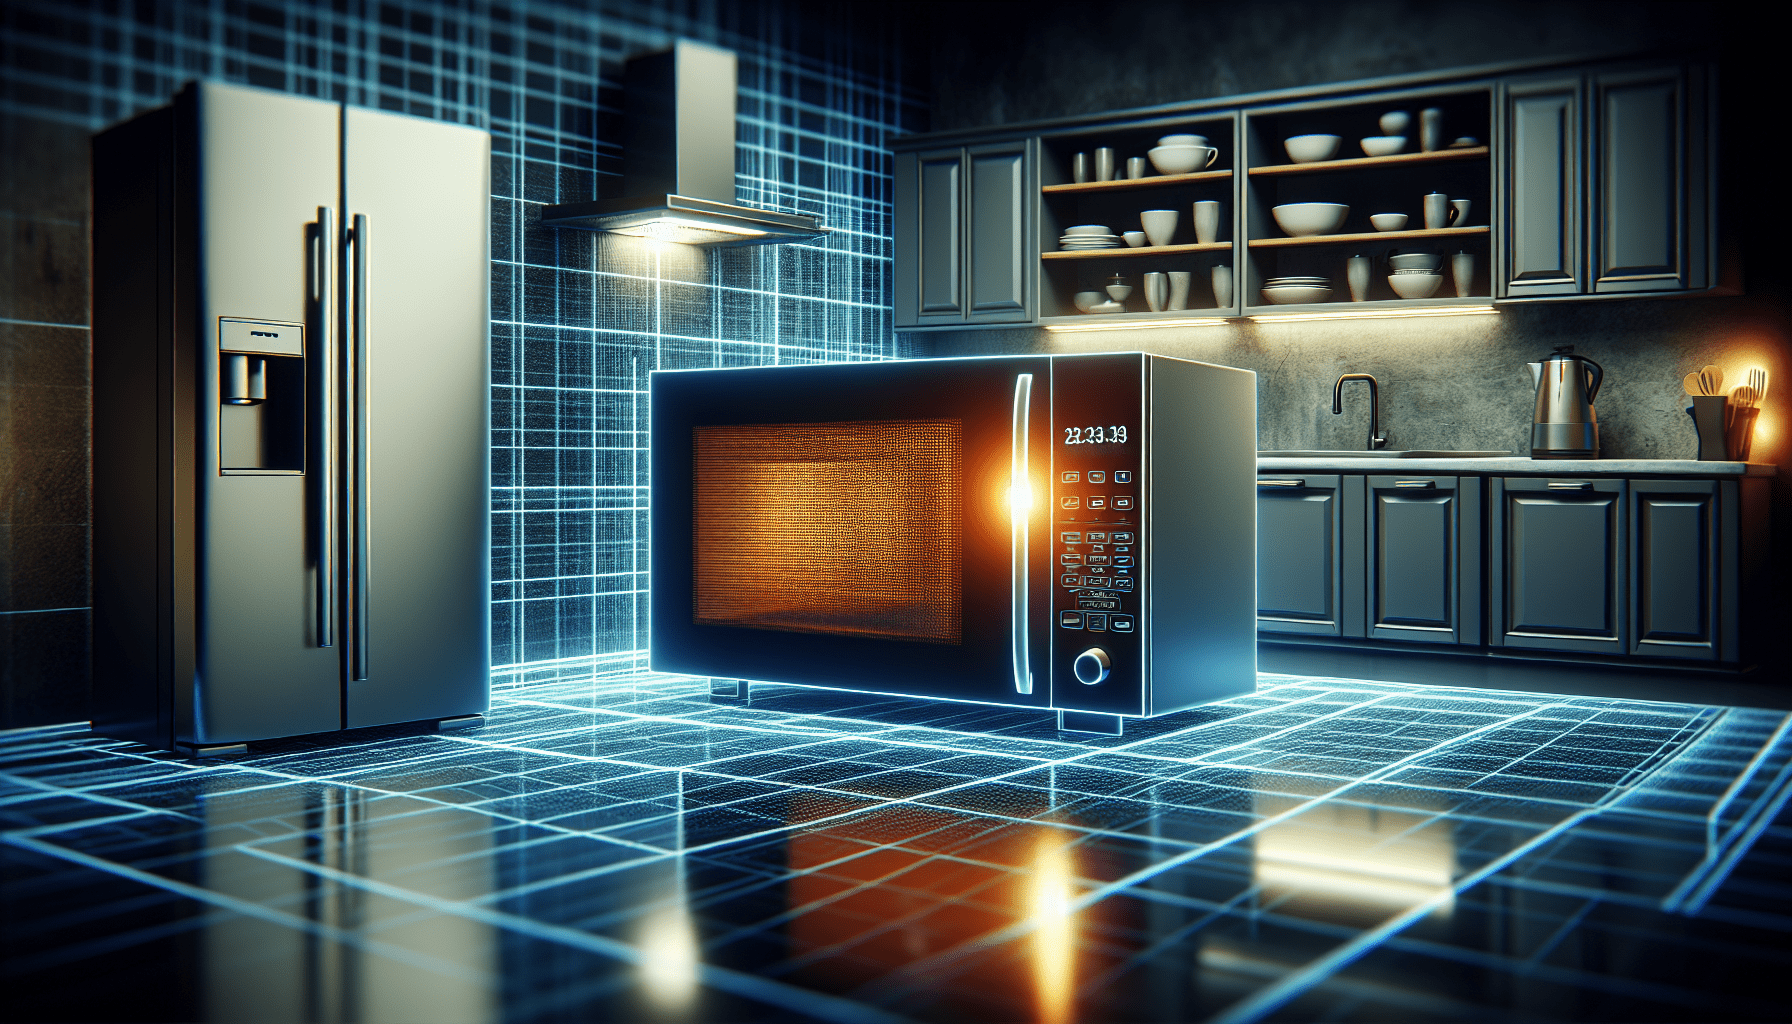 Are Microwaves A Major Appliance?